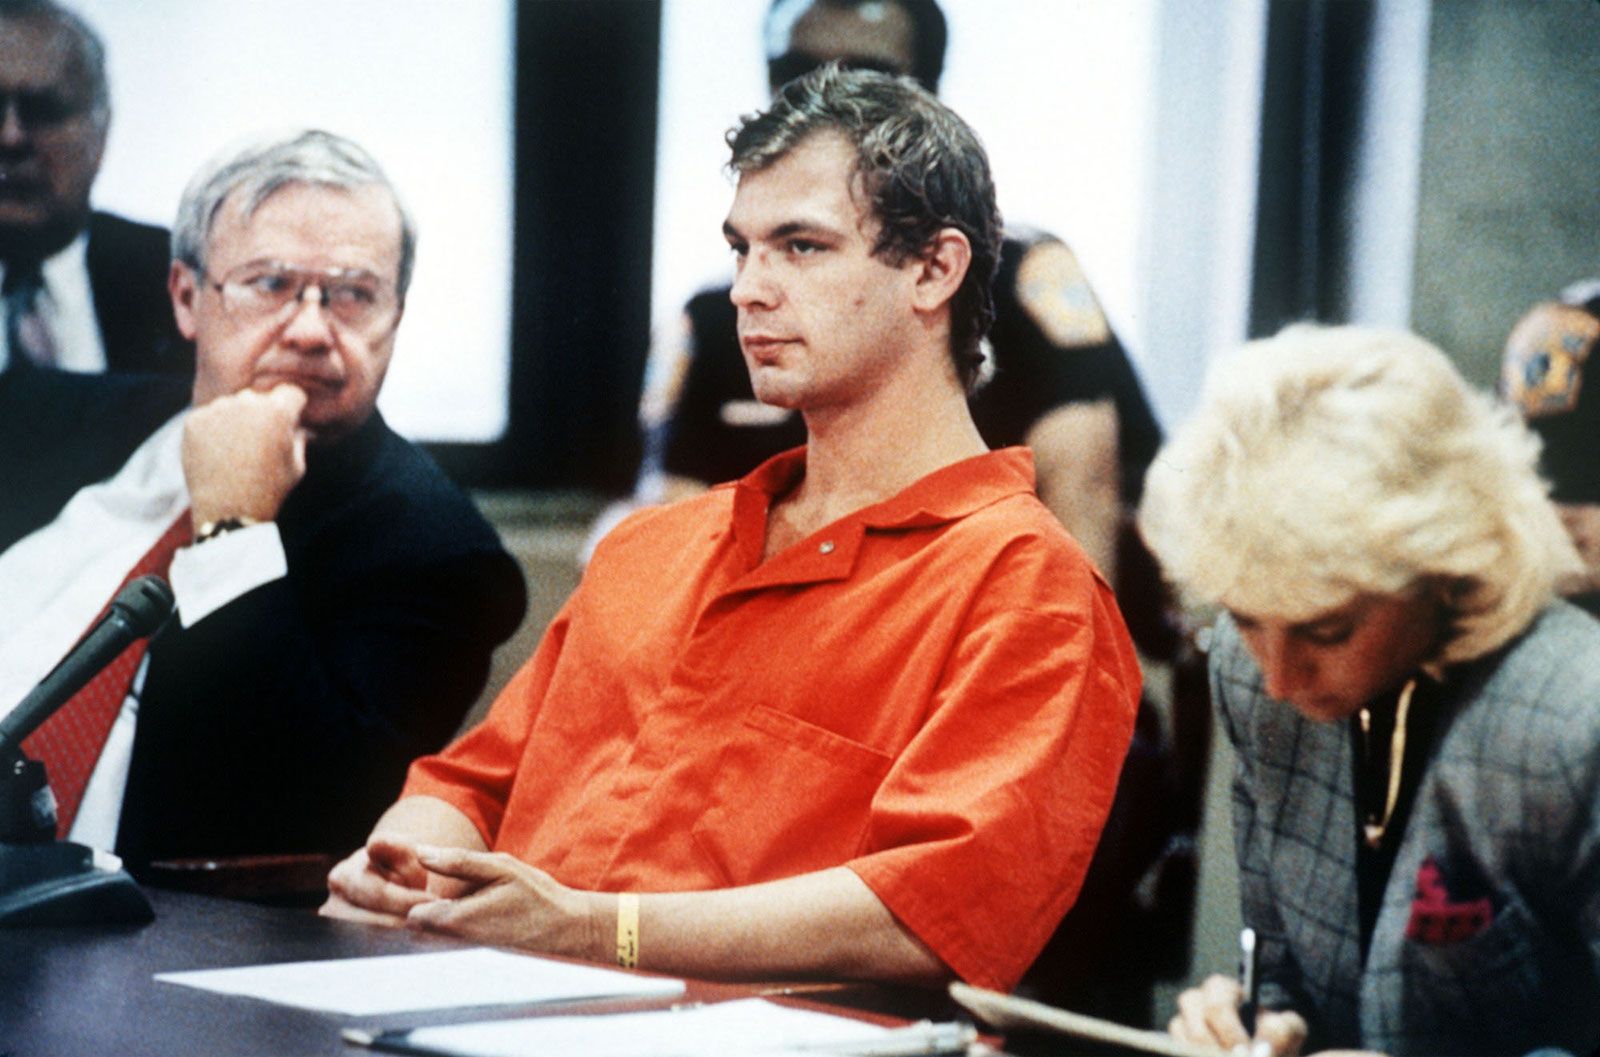 Jeffrey Dahmer flanked by his attorneys during a preliminary hearing in Milwaukee, Wisconsin, August 22, 1991.